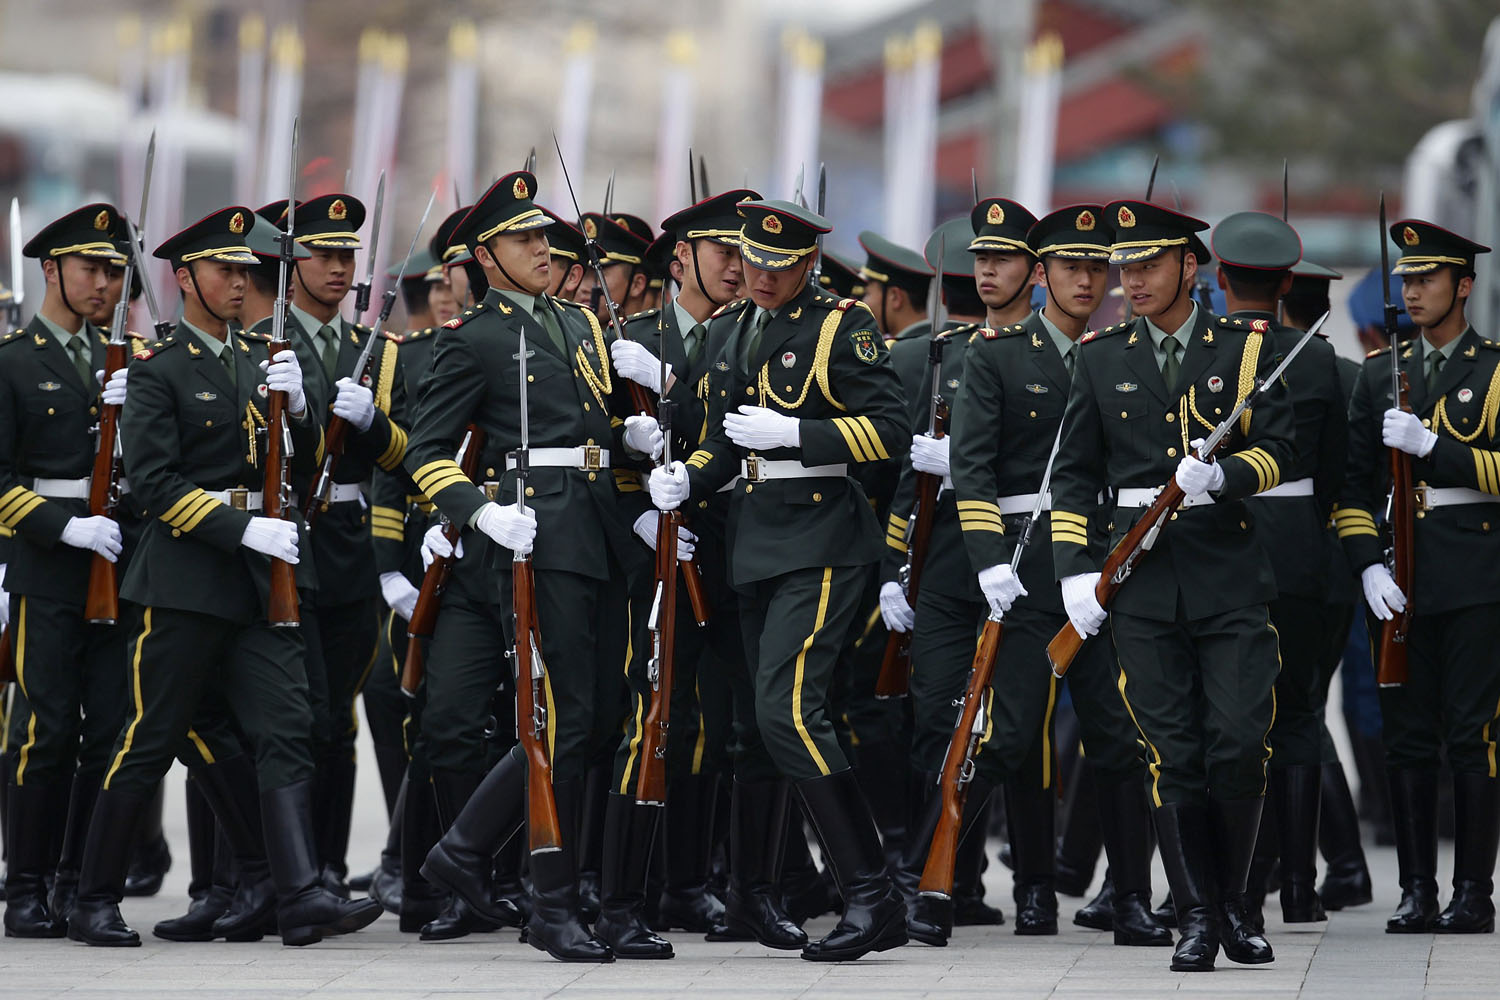 Honour guard troops line up before a welcome ceremony for New Zealand's Prime Minister John Key outside the Great Hall of the People in Beijing